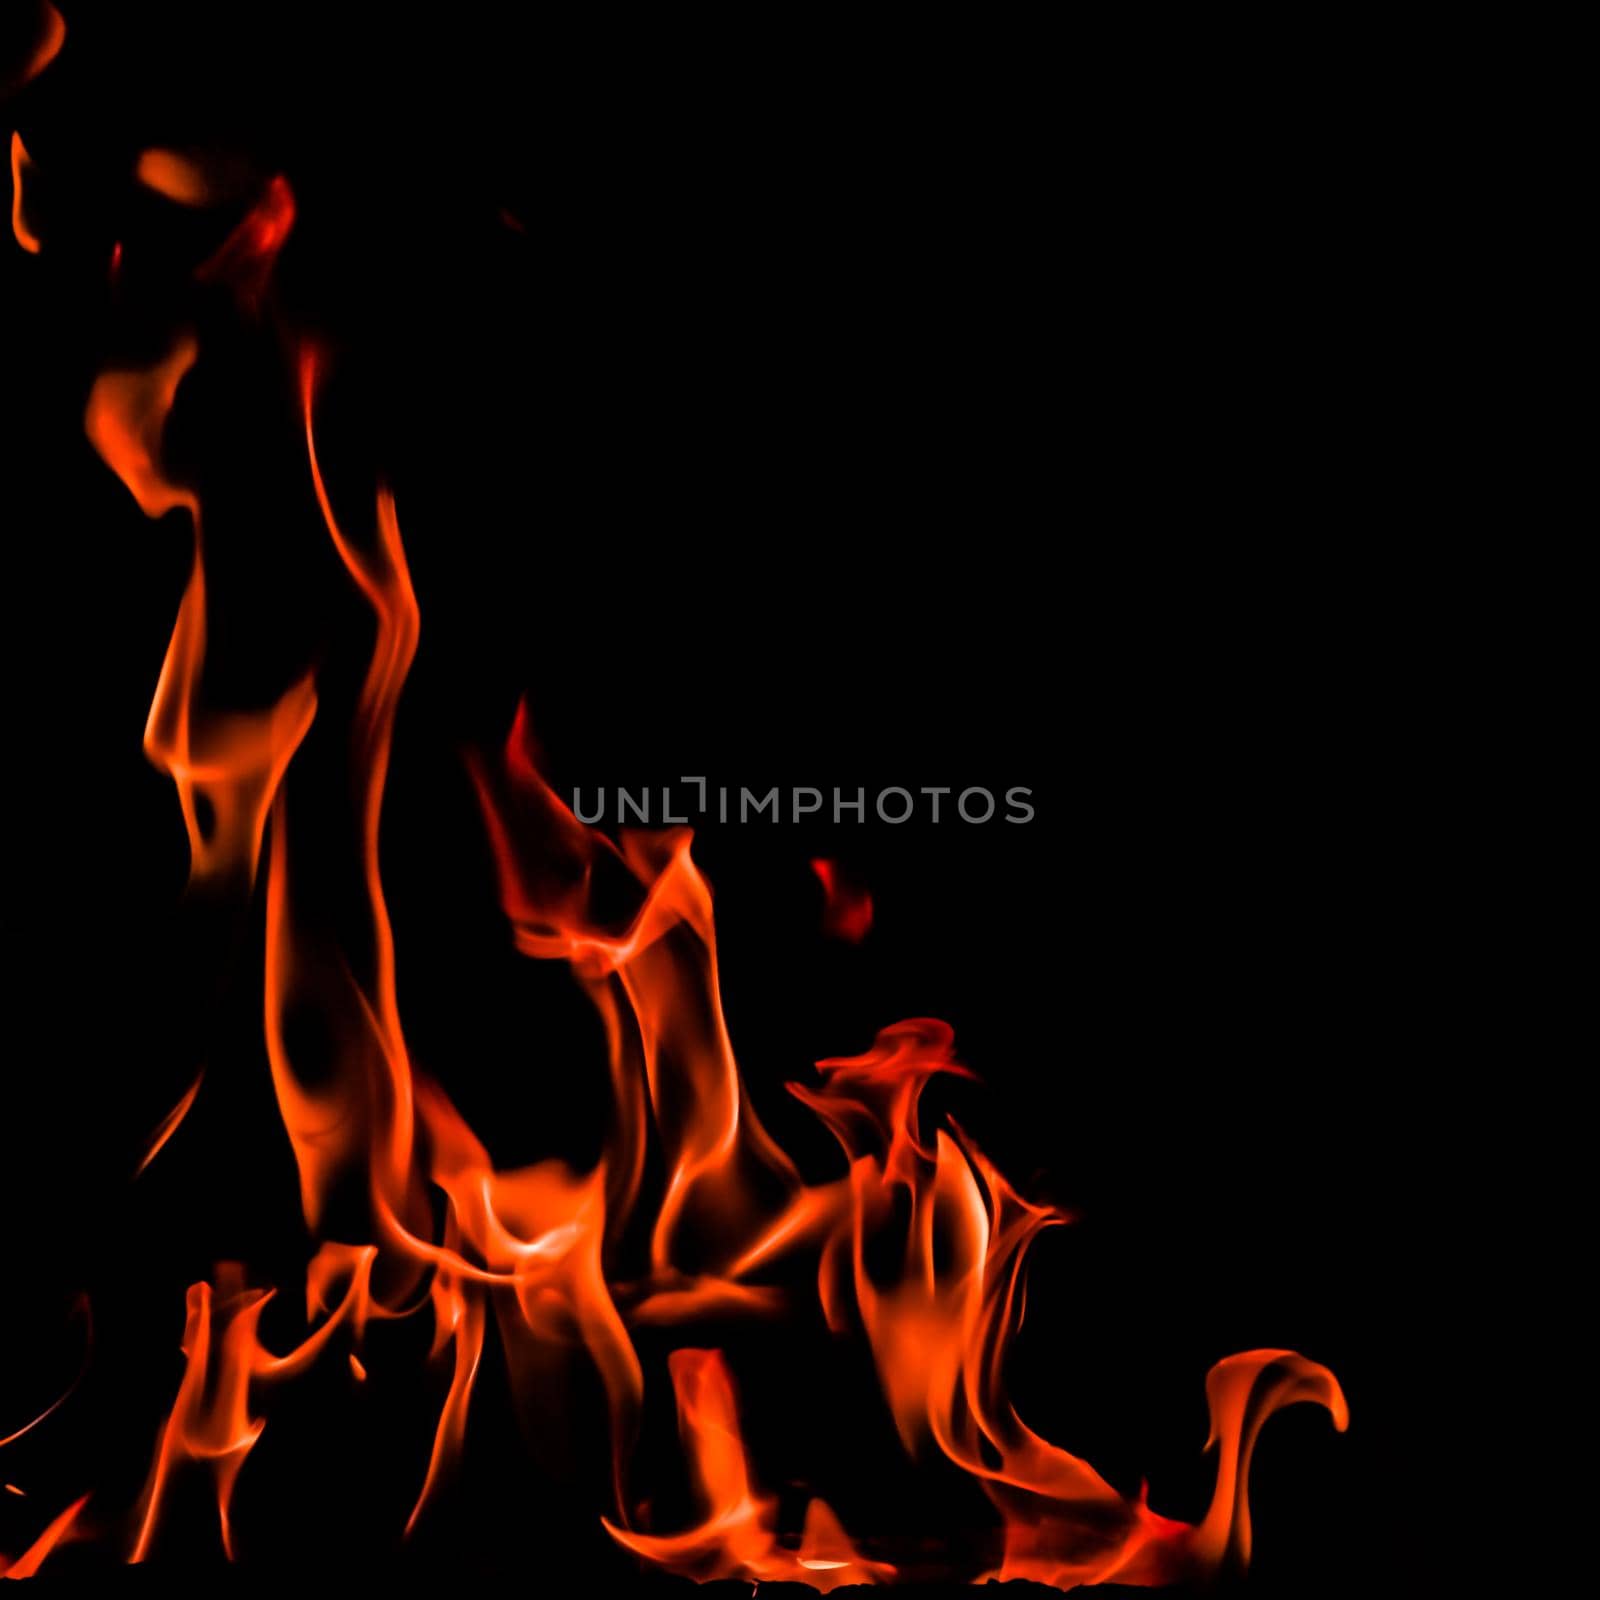 Flames of fire on a black background. Space for copy, text, your words. With a 1x1 square proportion. Diagonal